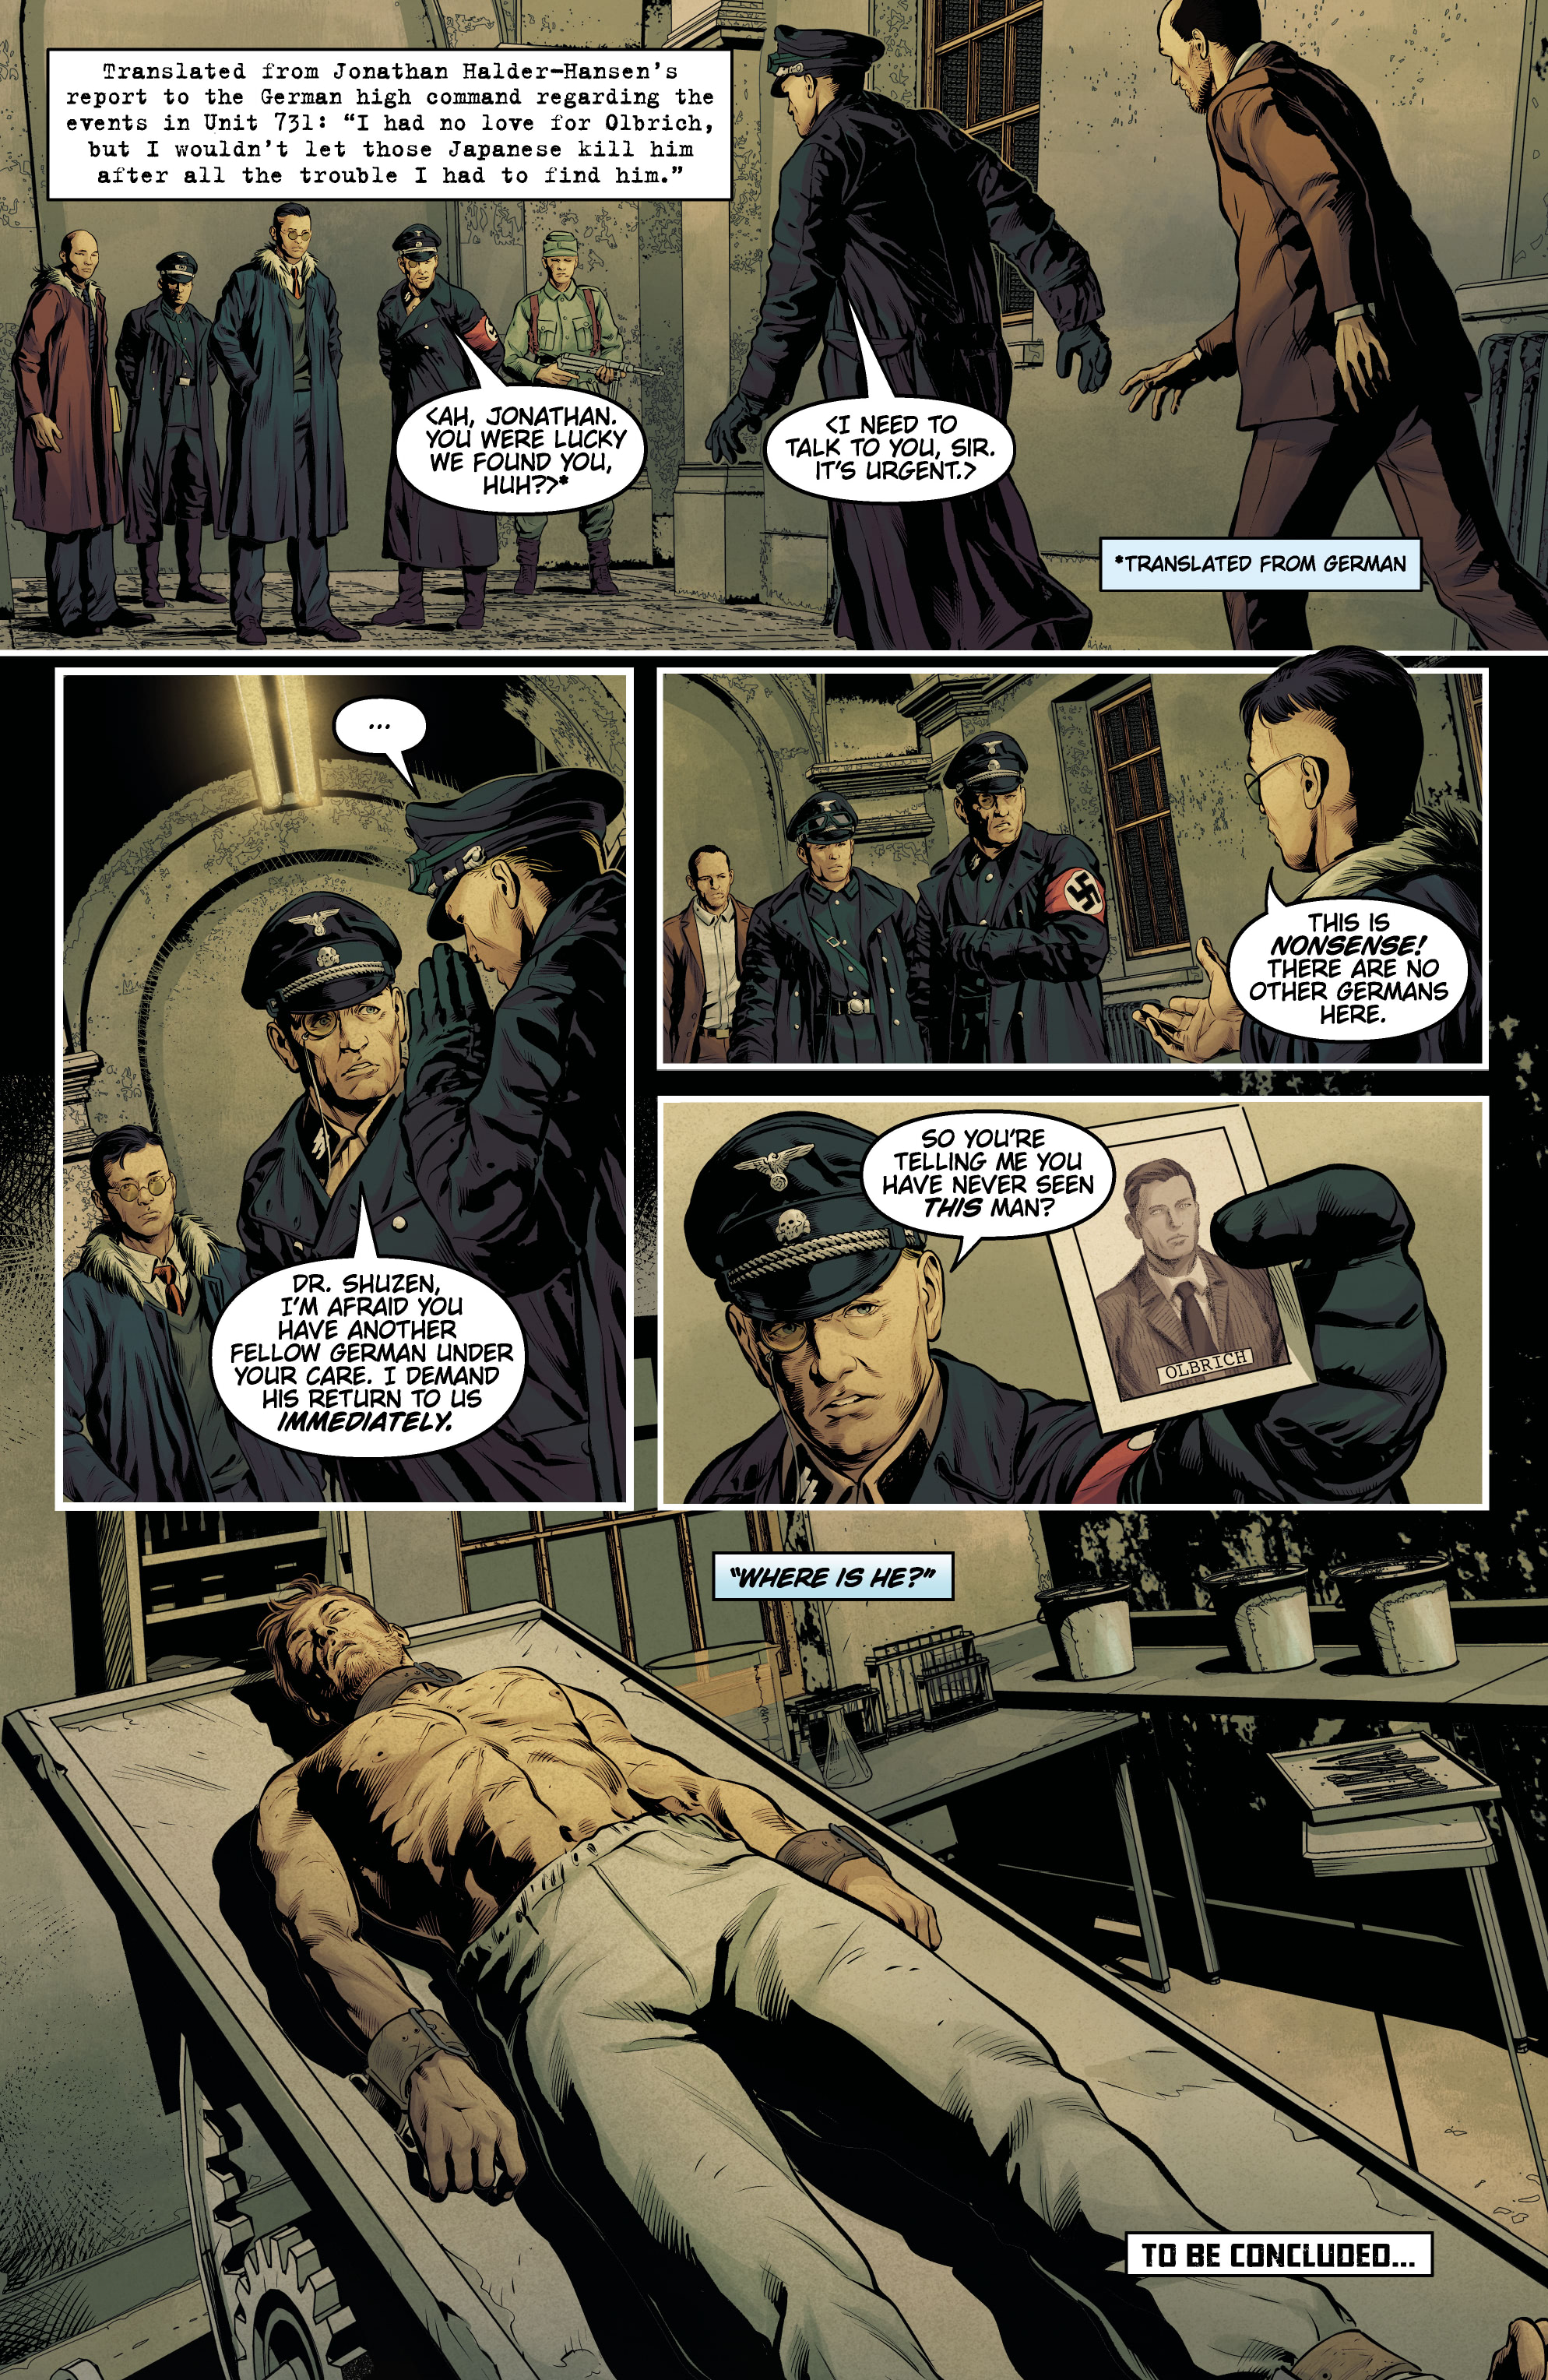 Read online The Collector: Unit 731 comic -  Issue #3 - 20